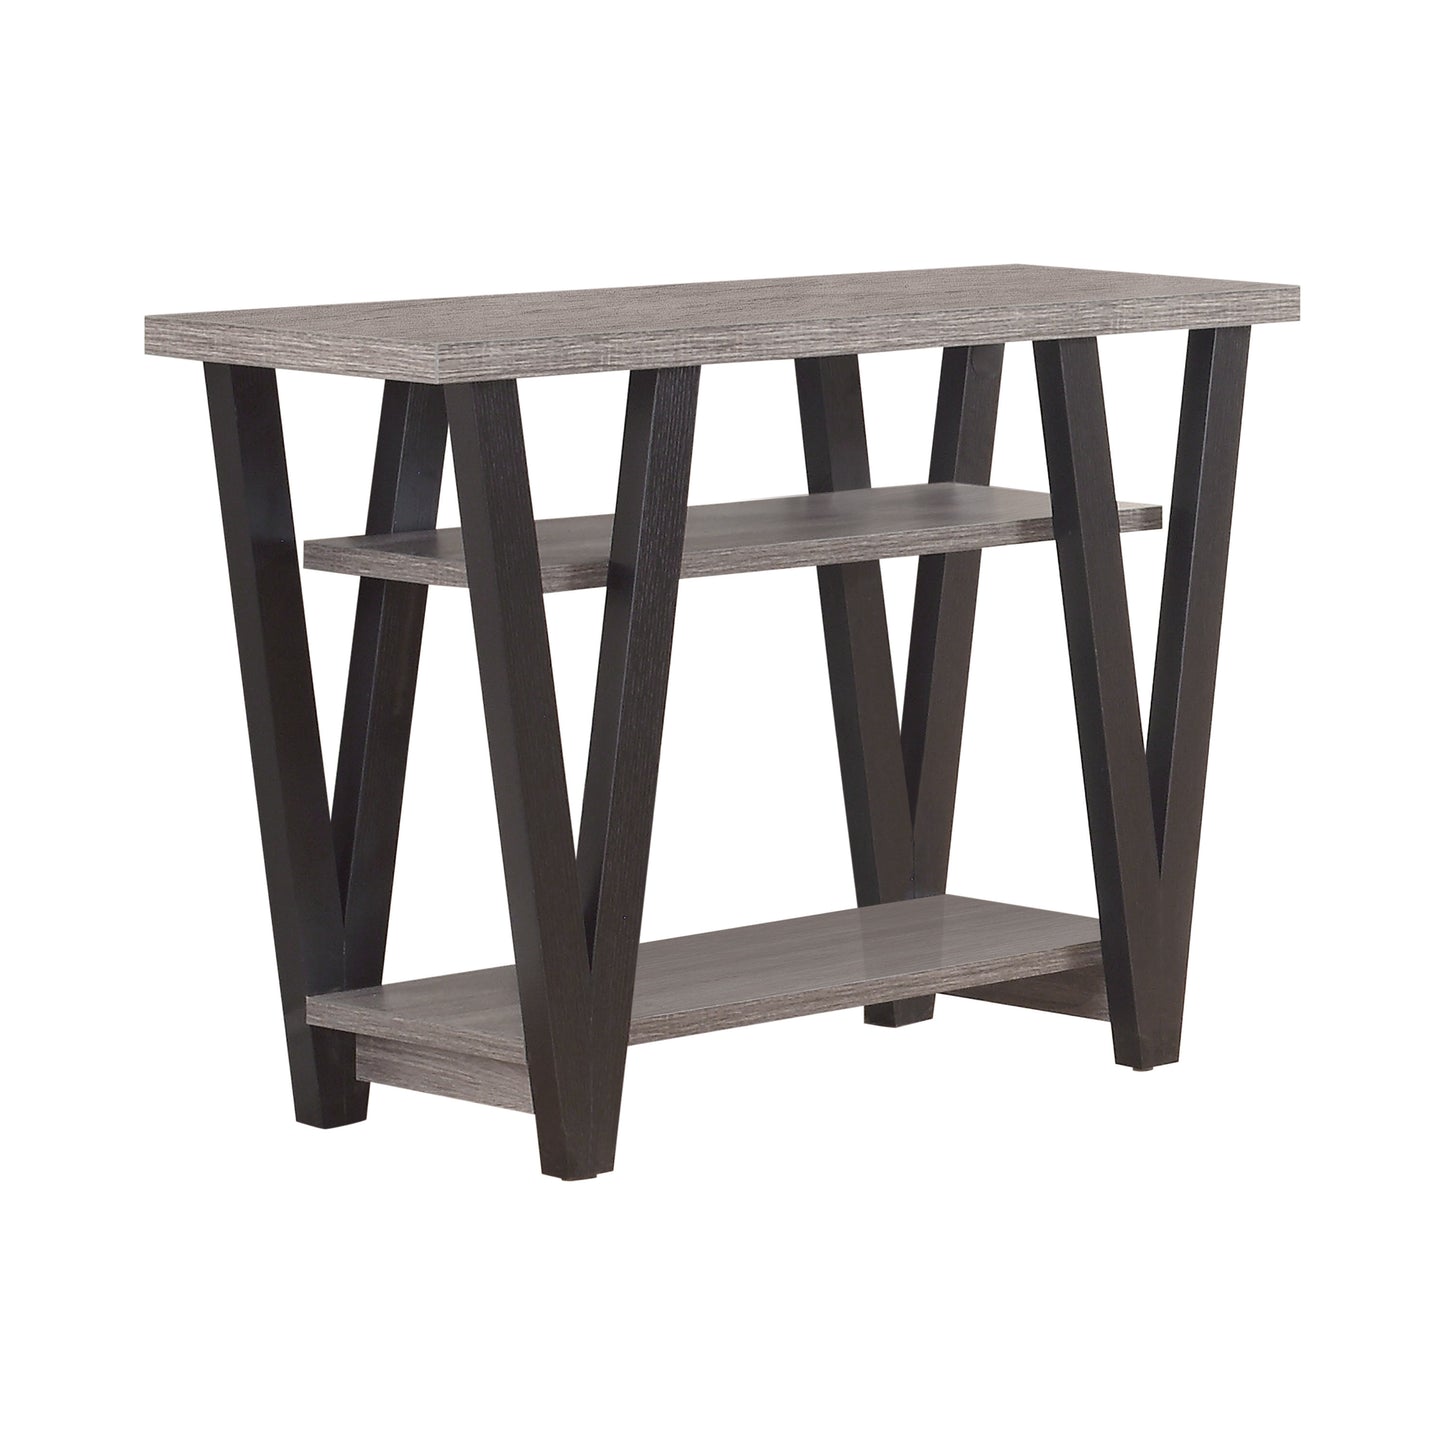 V-shaped Sofa Table Black and Antique Grey